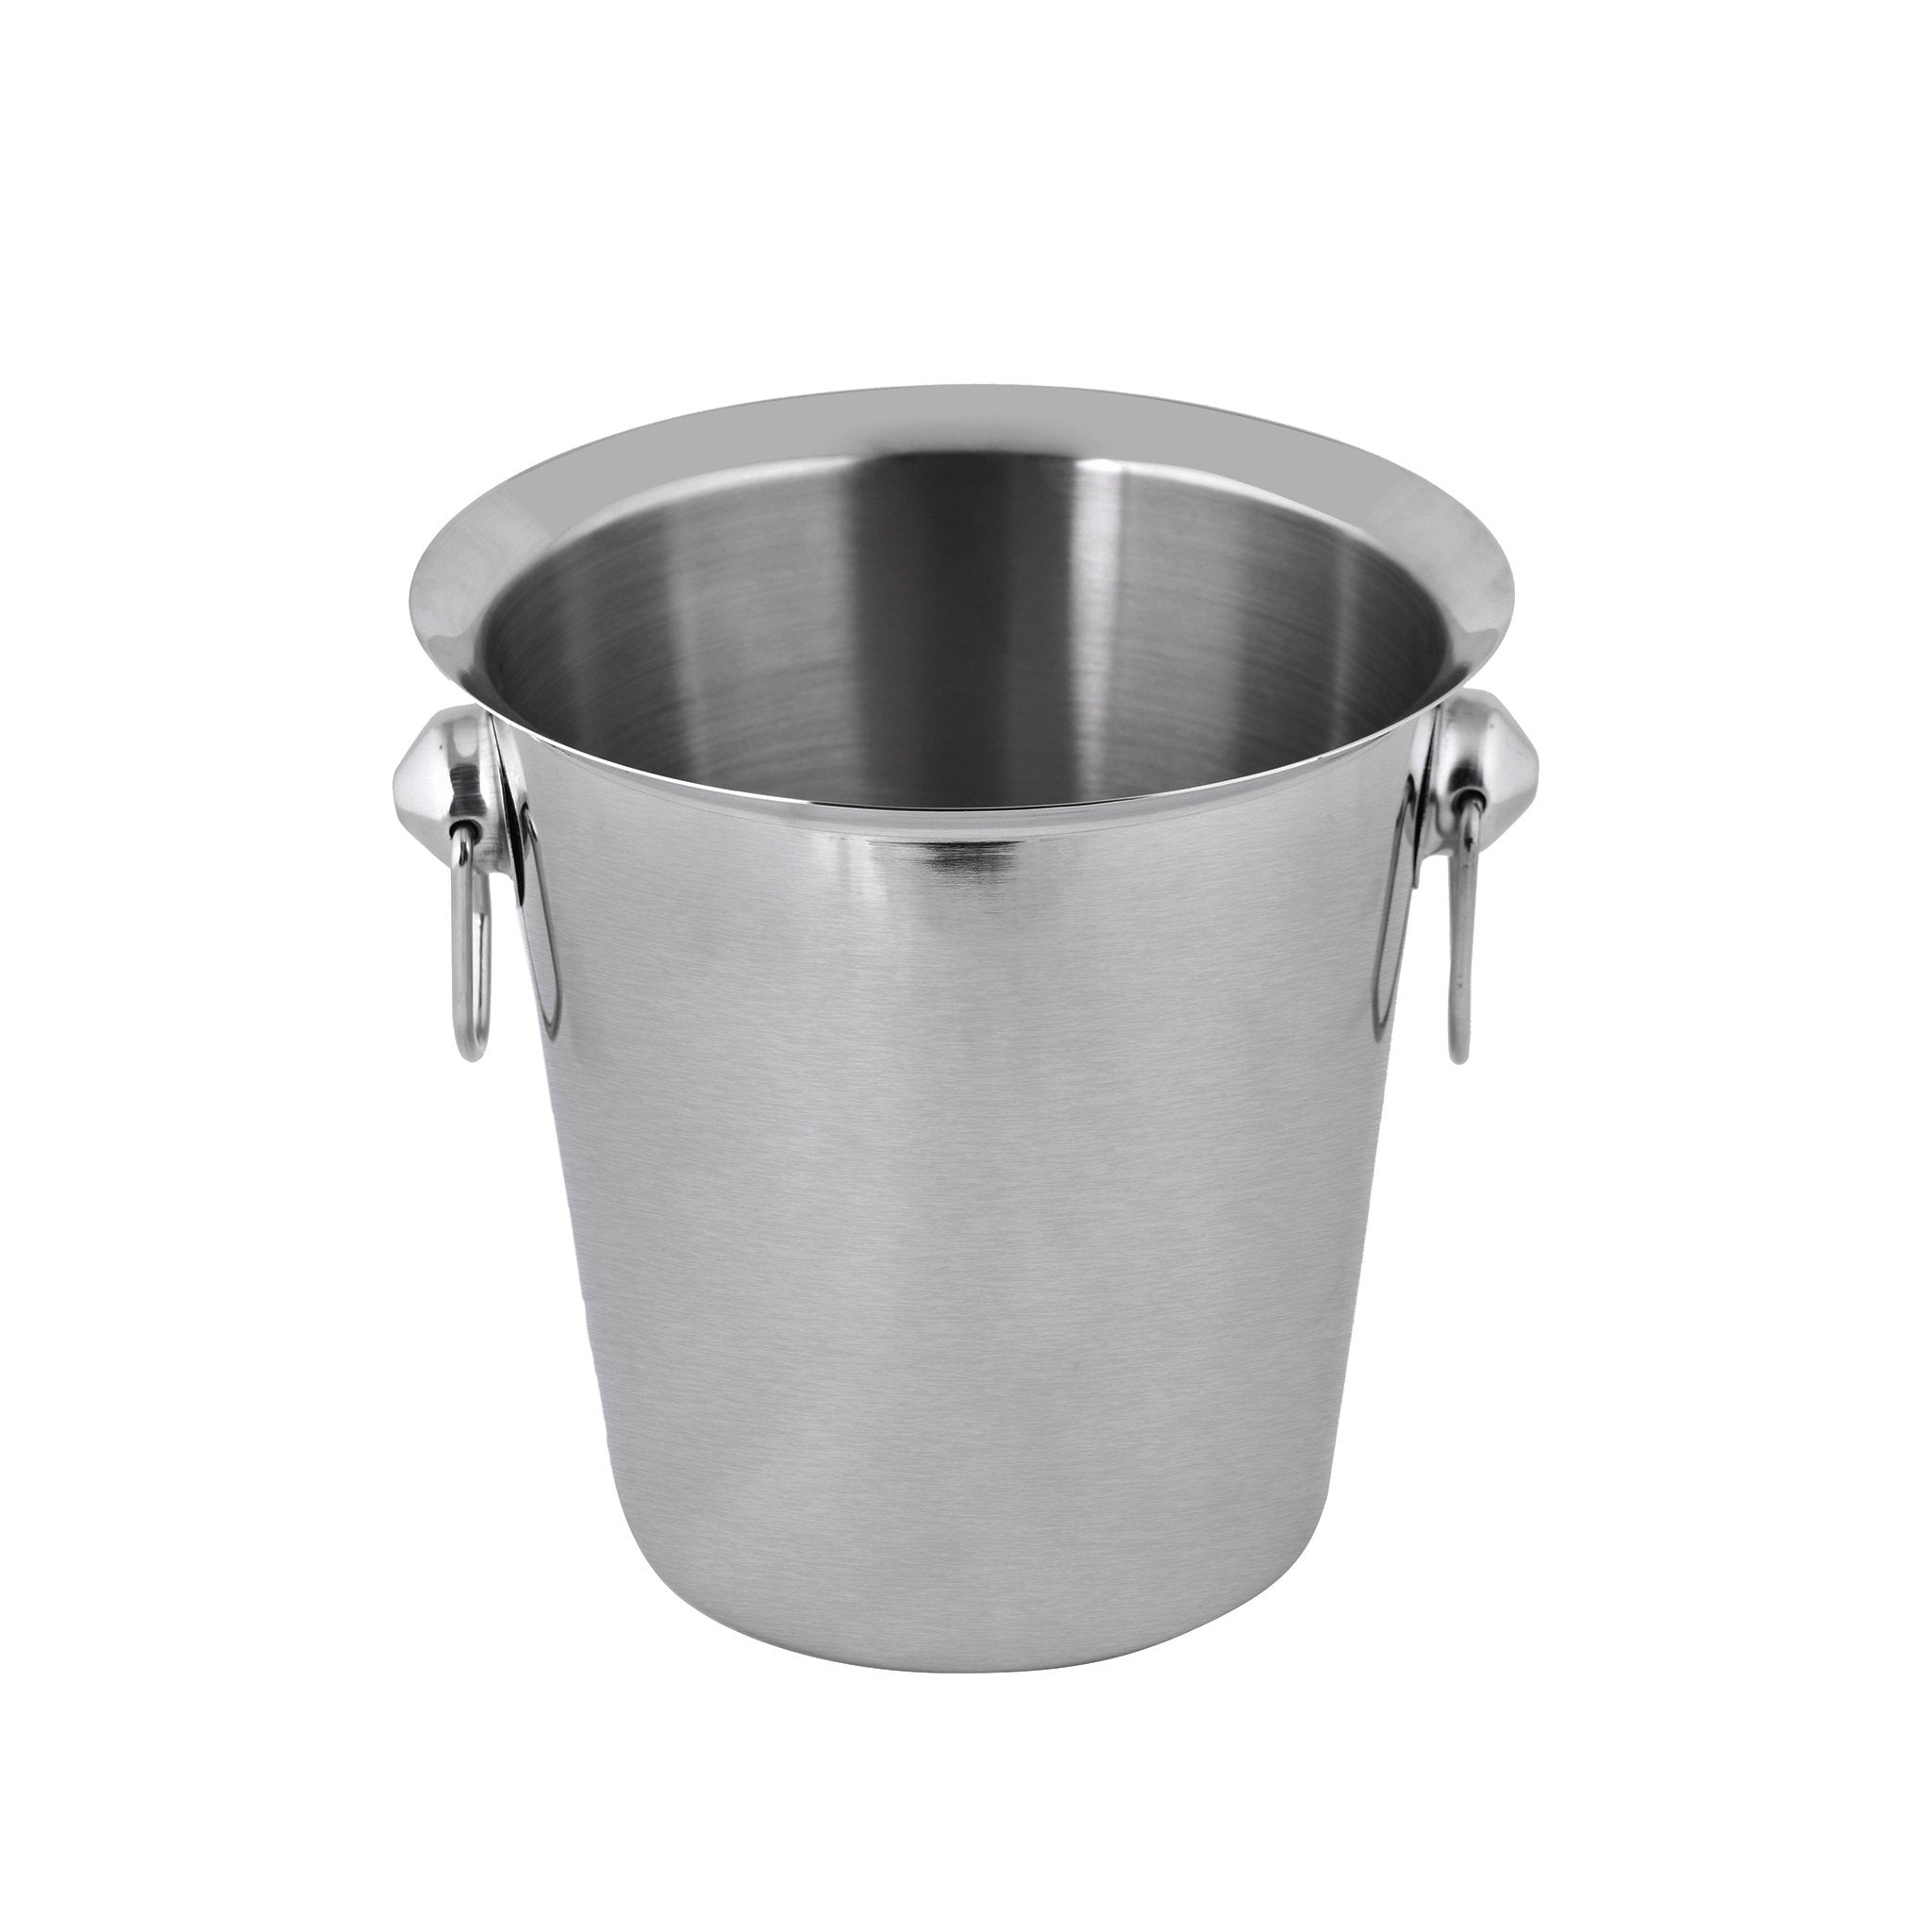 Ice Bucket with Ring Handles - Stainless Steel - 19.5cm - 80003982